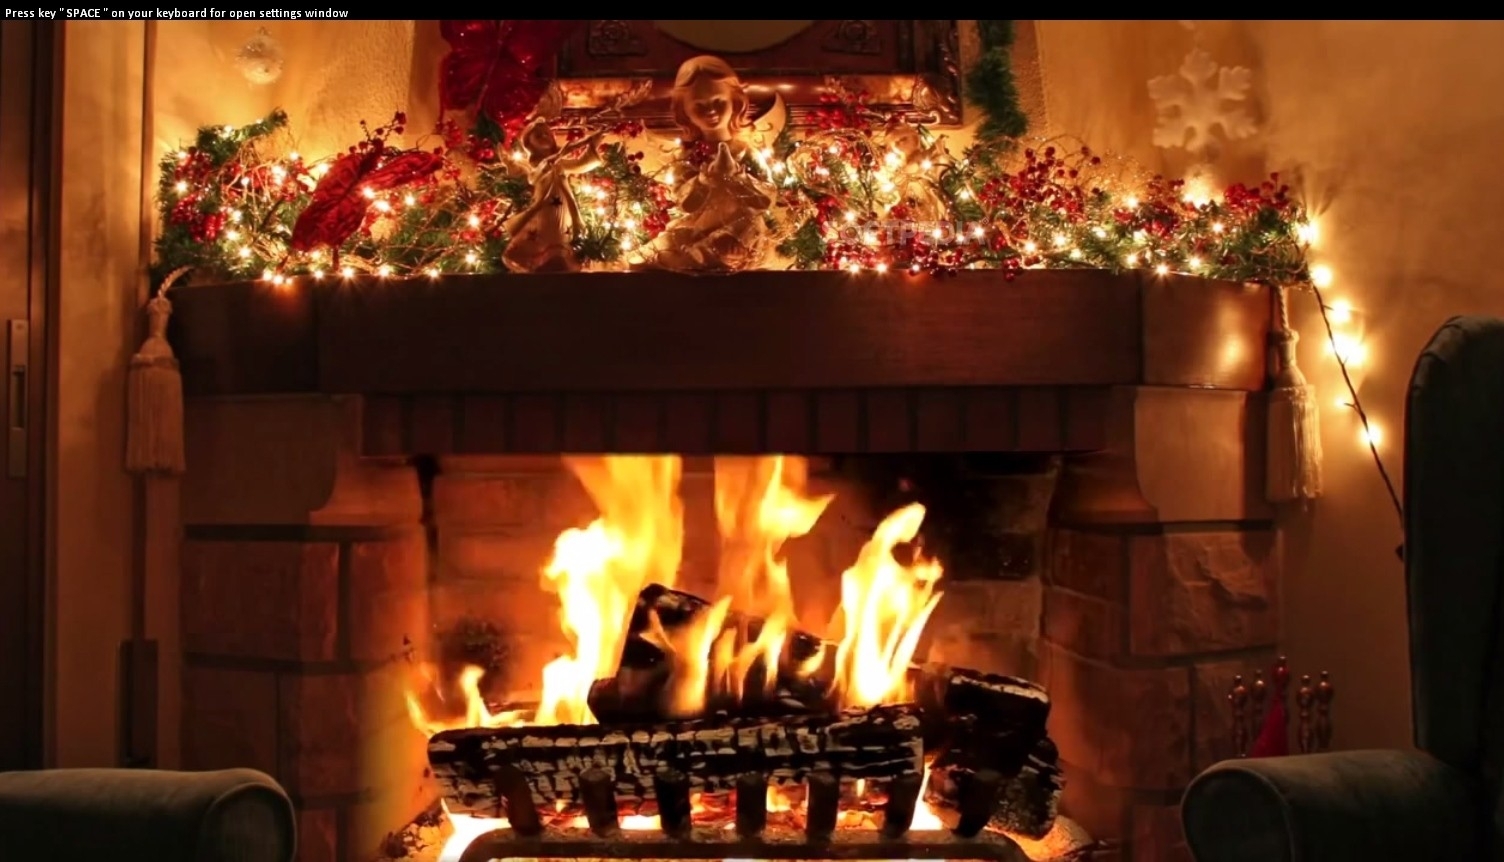 10 Latest Christmas Fireplace Screensaver Free FULL HD 1080p For PC Background